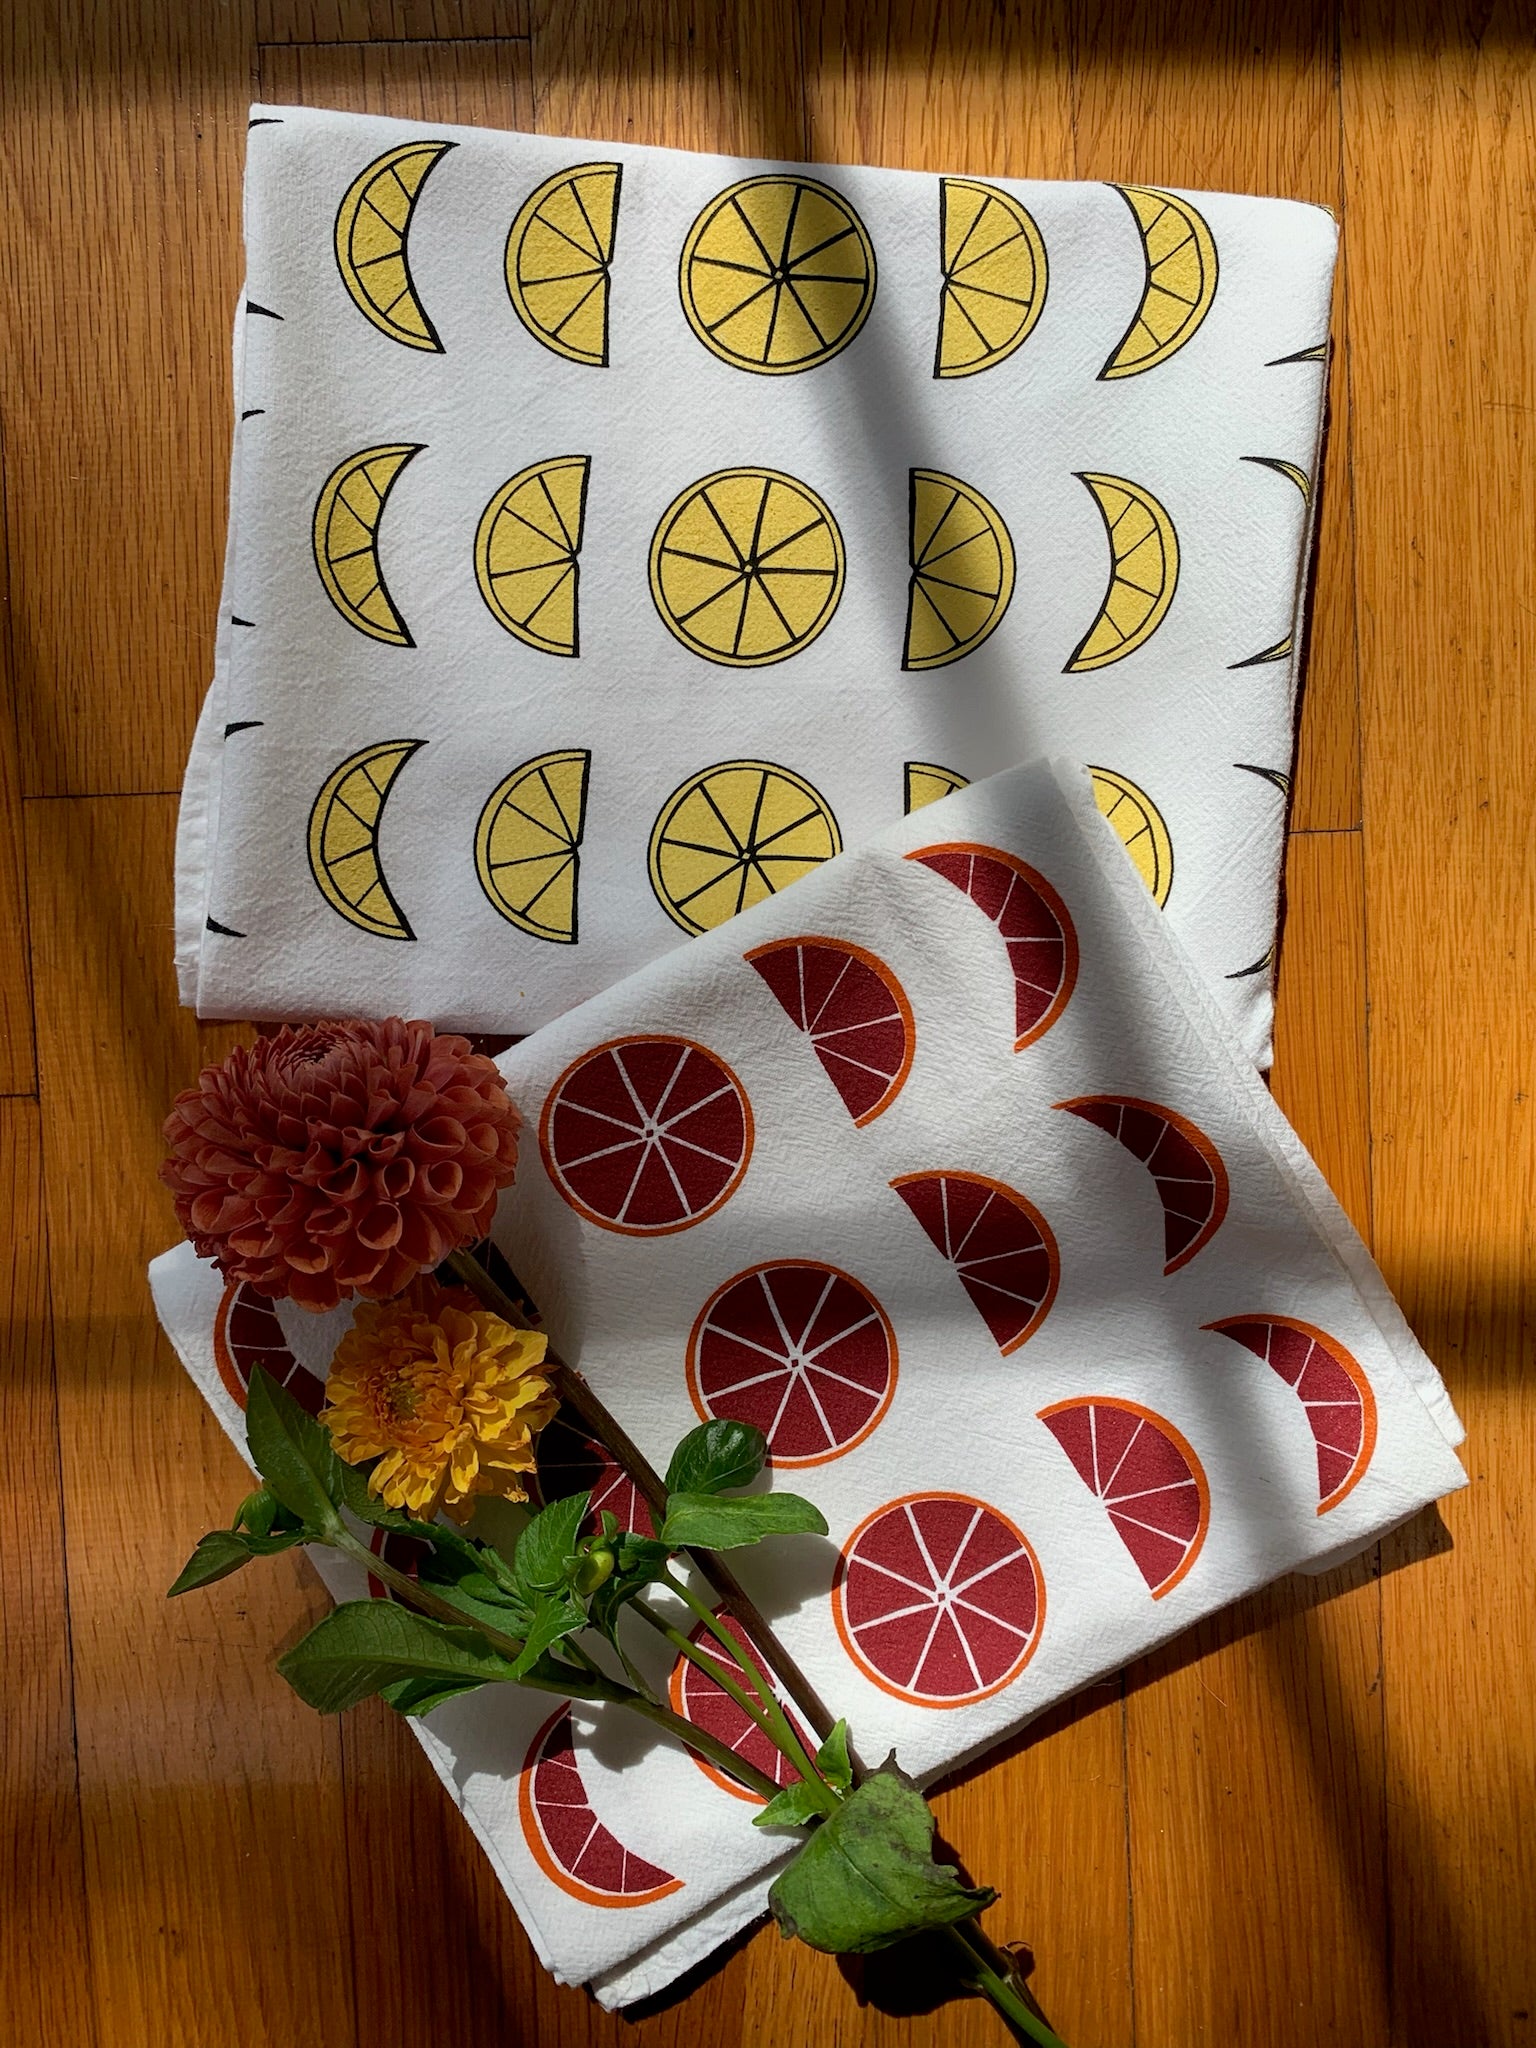 Two tea towels with different citrus moon phase designs